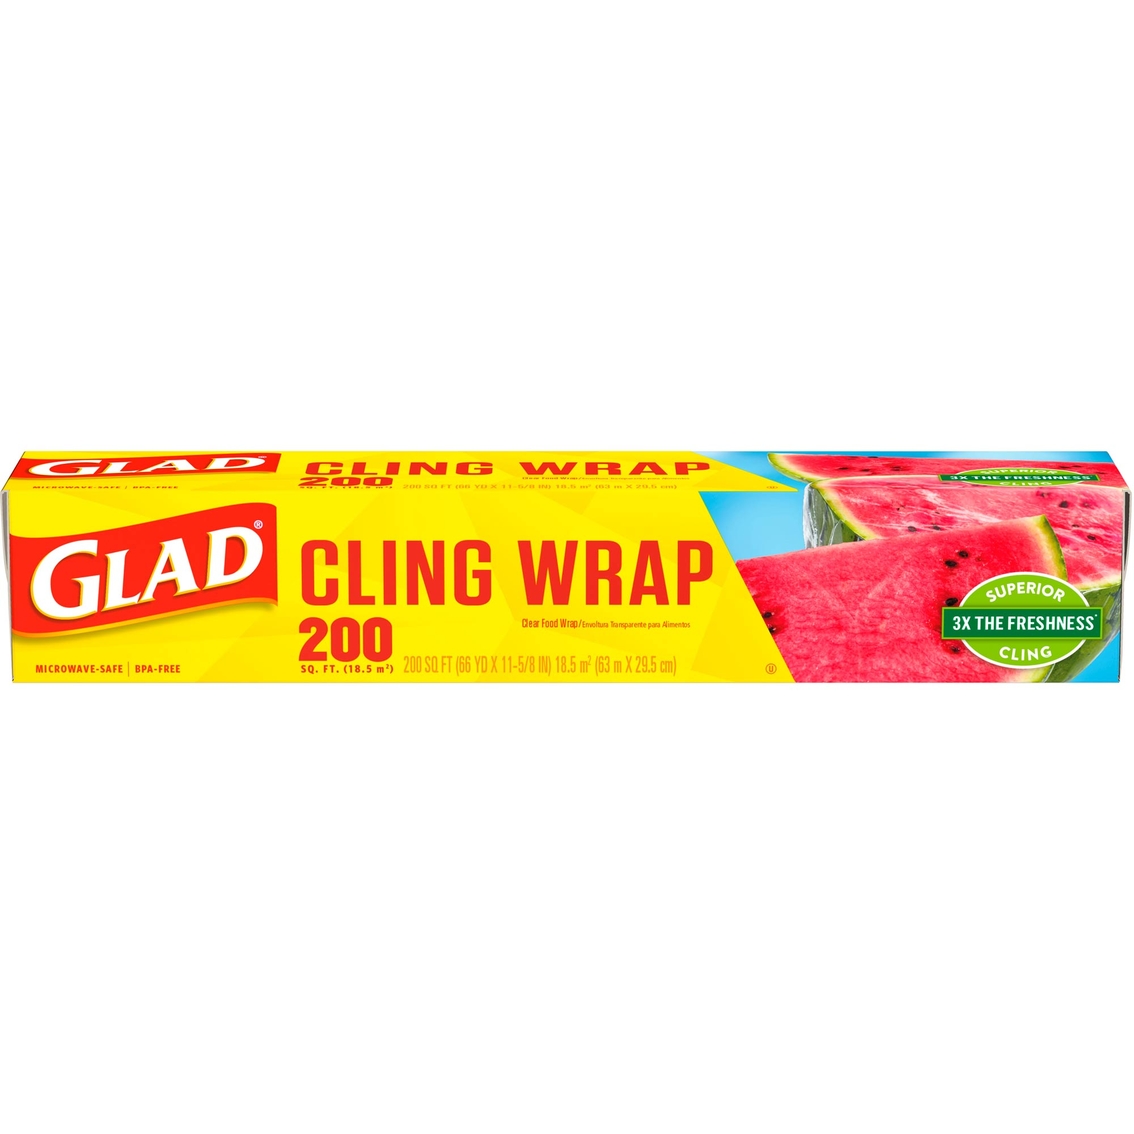 Glad Holiday Cling Wrap Plastic Wrap Roll, Red, 300 sq ft